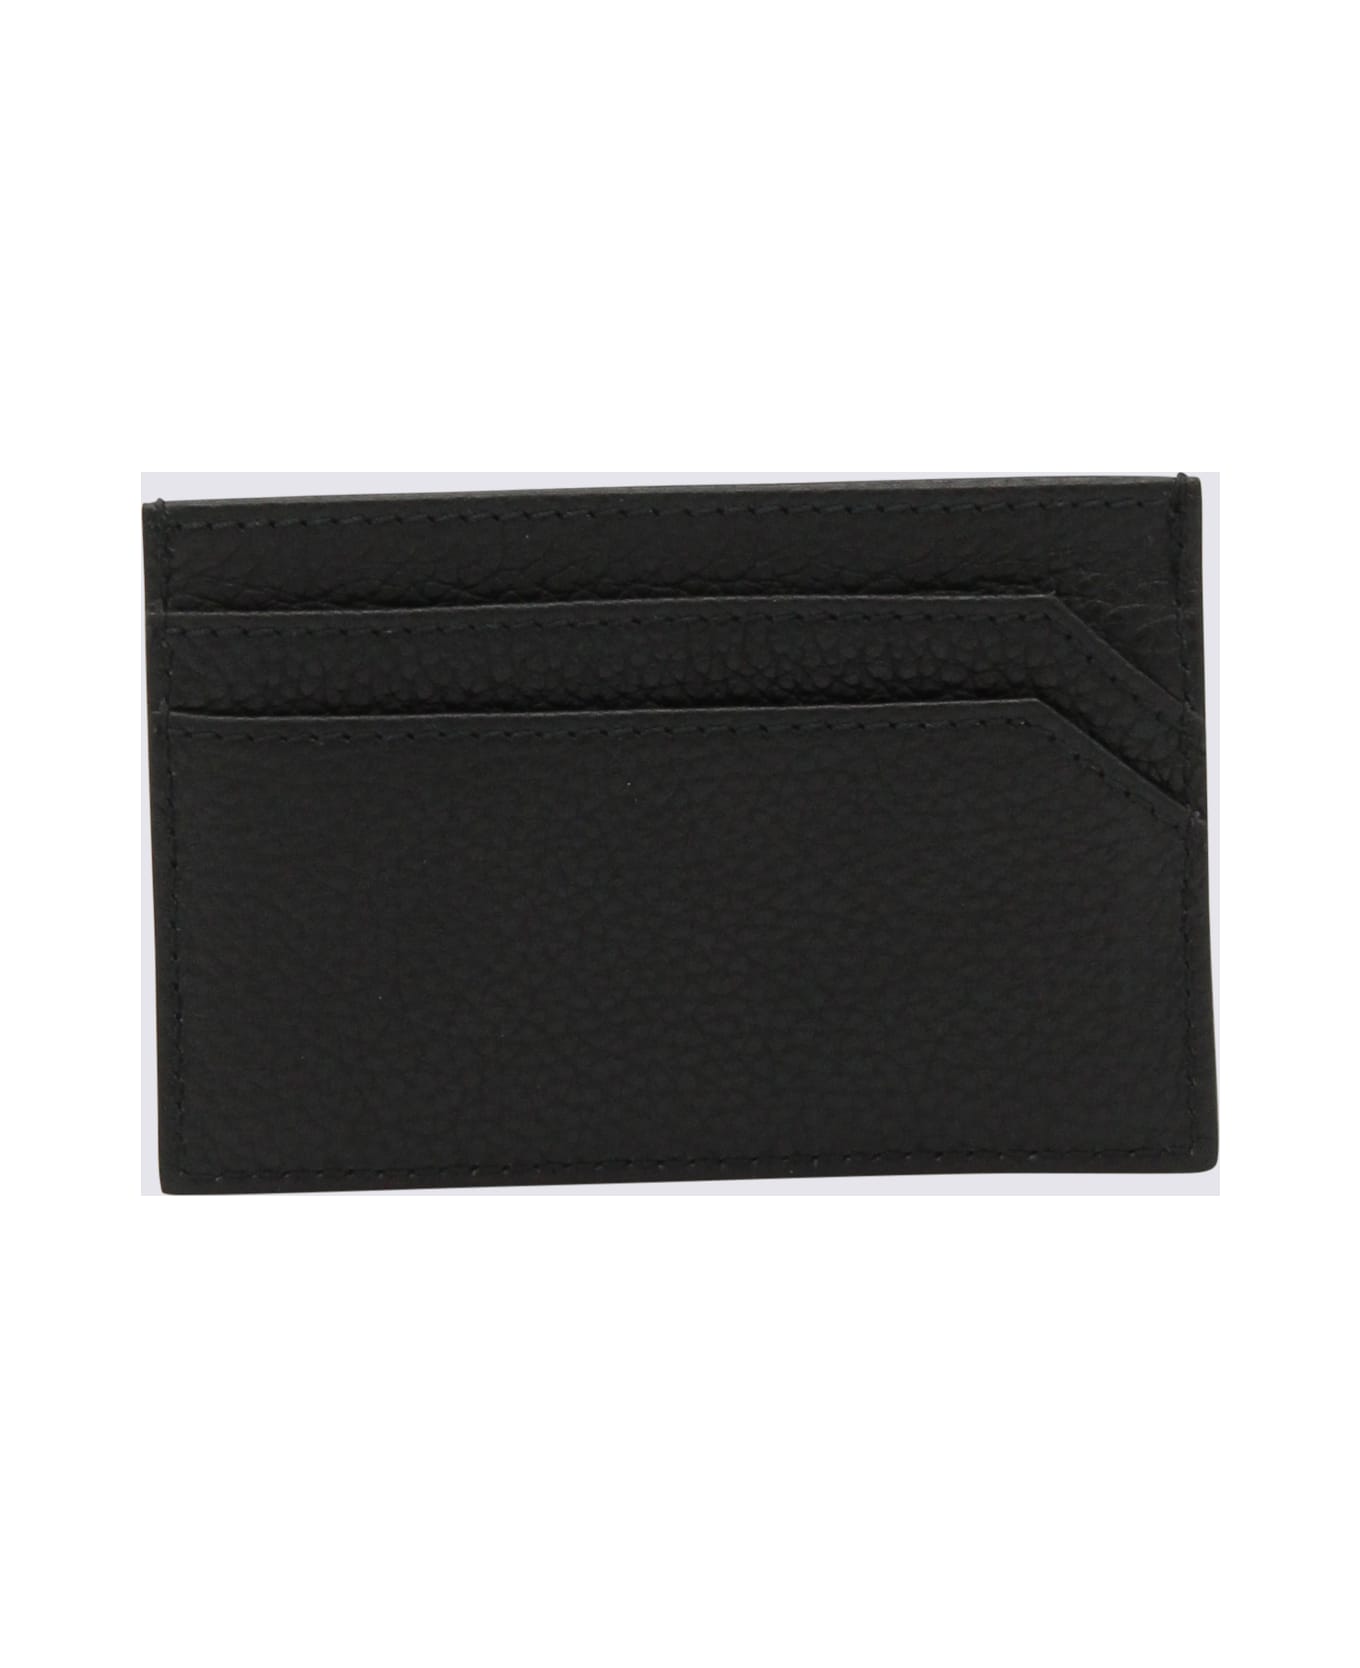 Jimmy Choo Black And Silver Leather Wallet - Black 財布